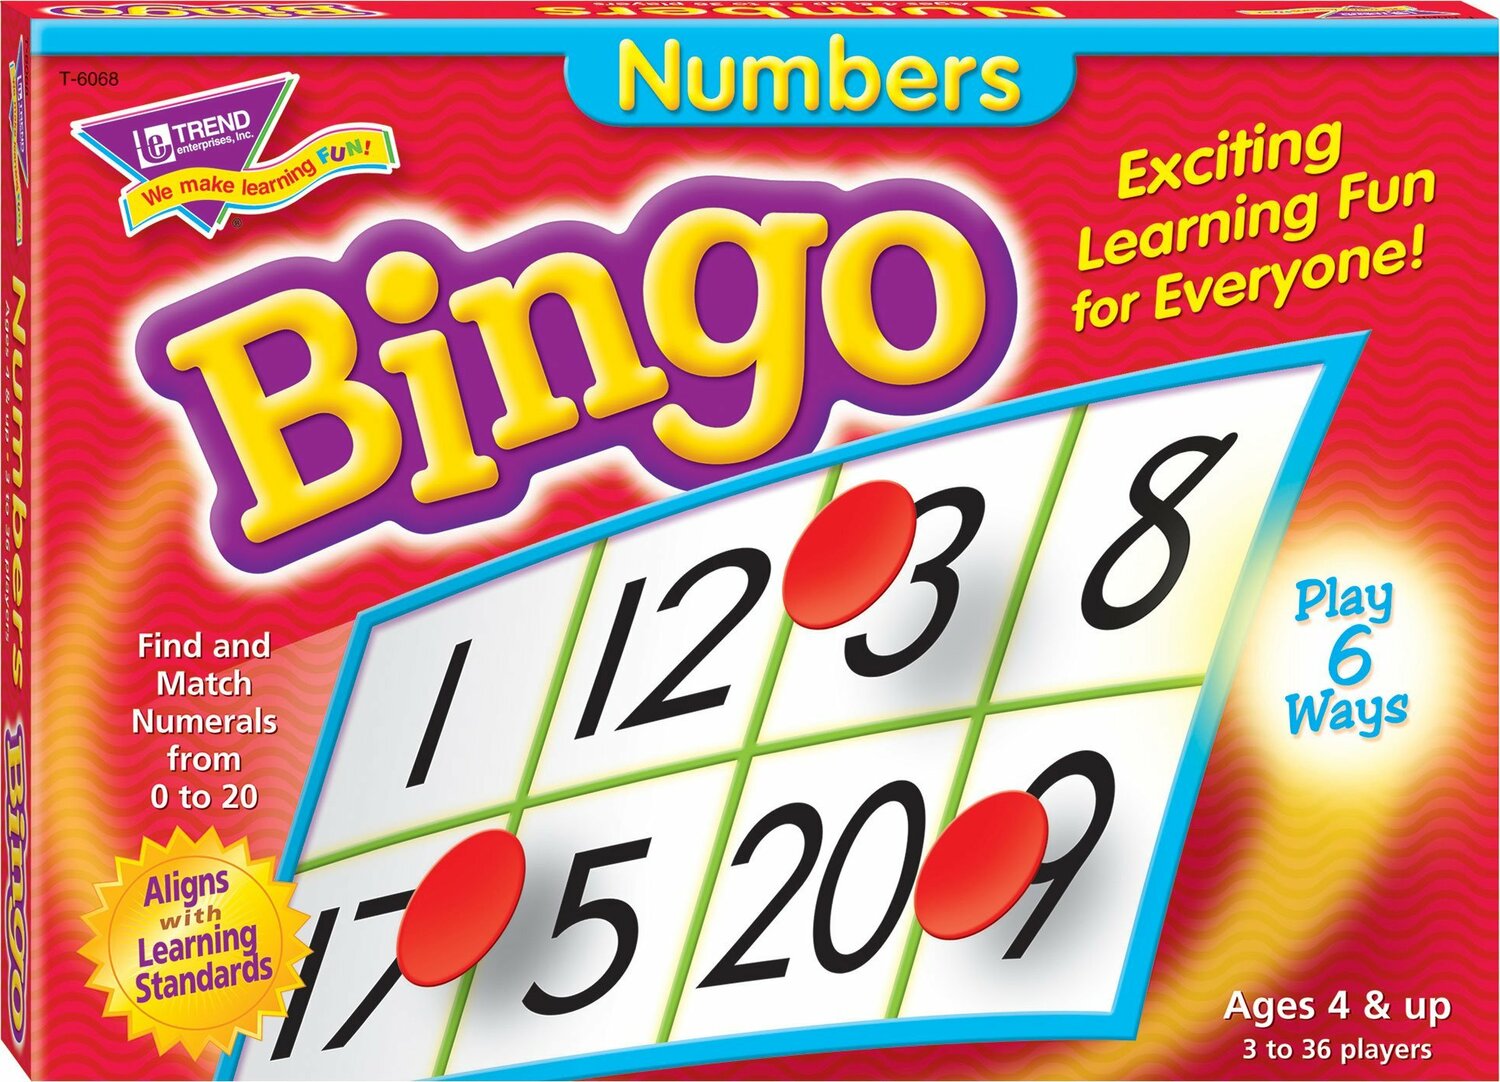 How To Play Number Bingo Game